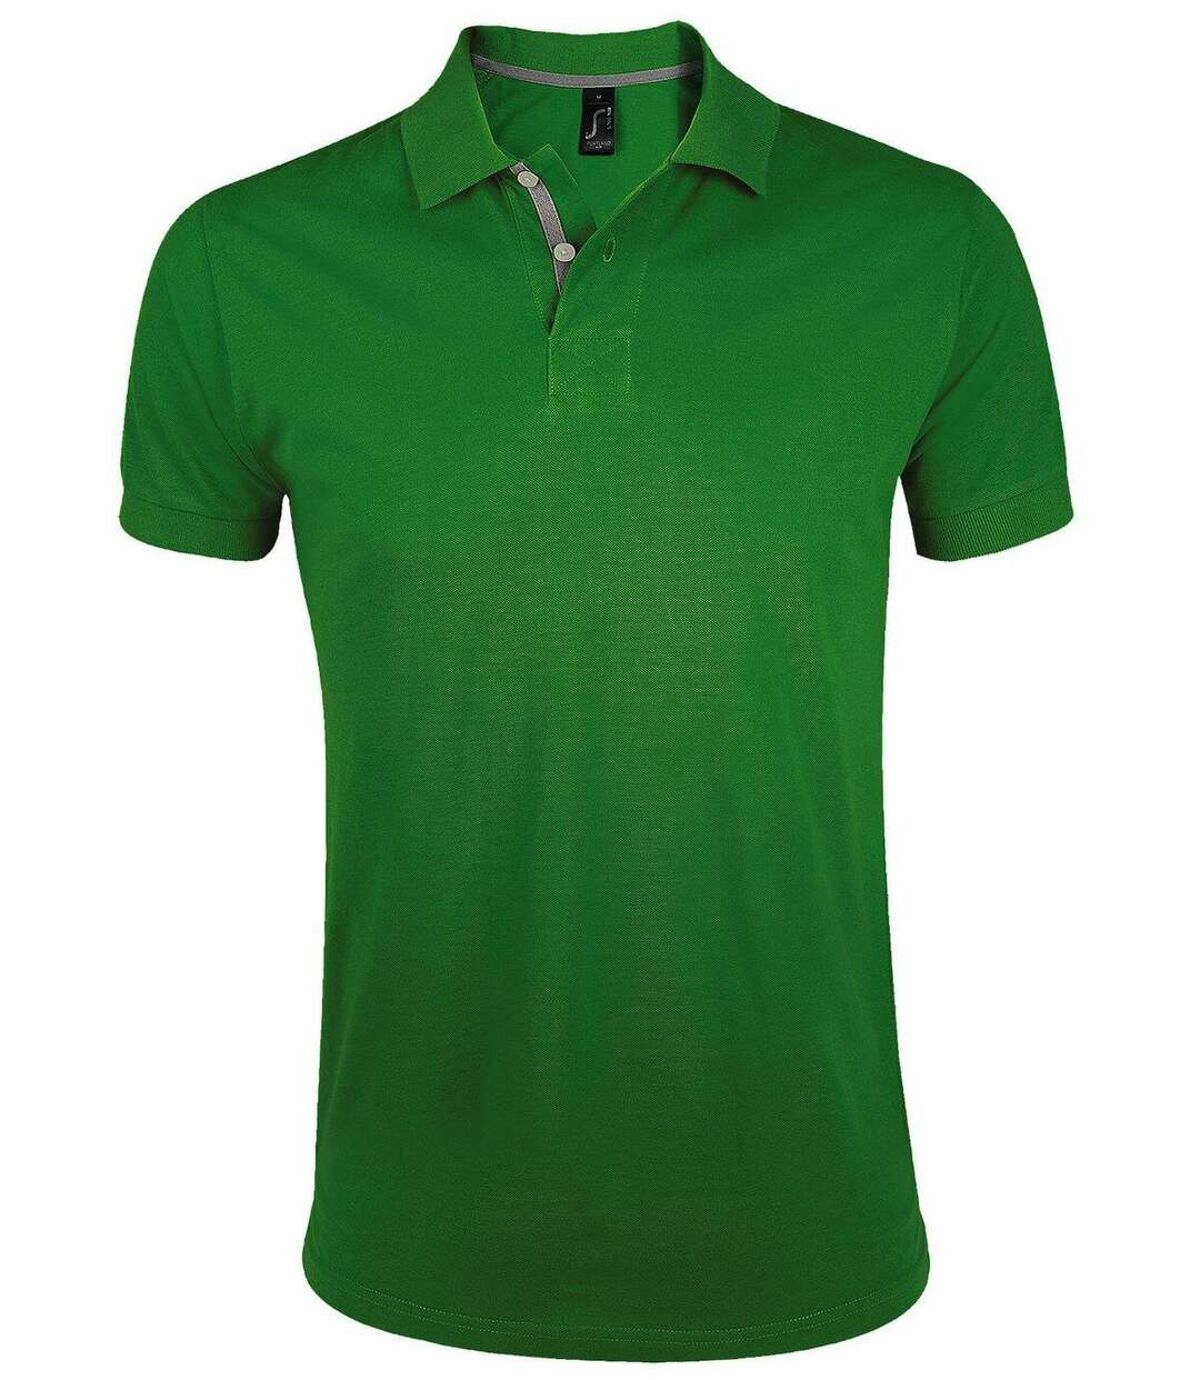 Polo manches courtes - homme - 00574 - vert bourgeon